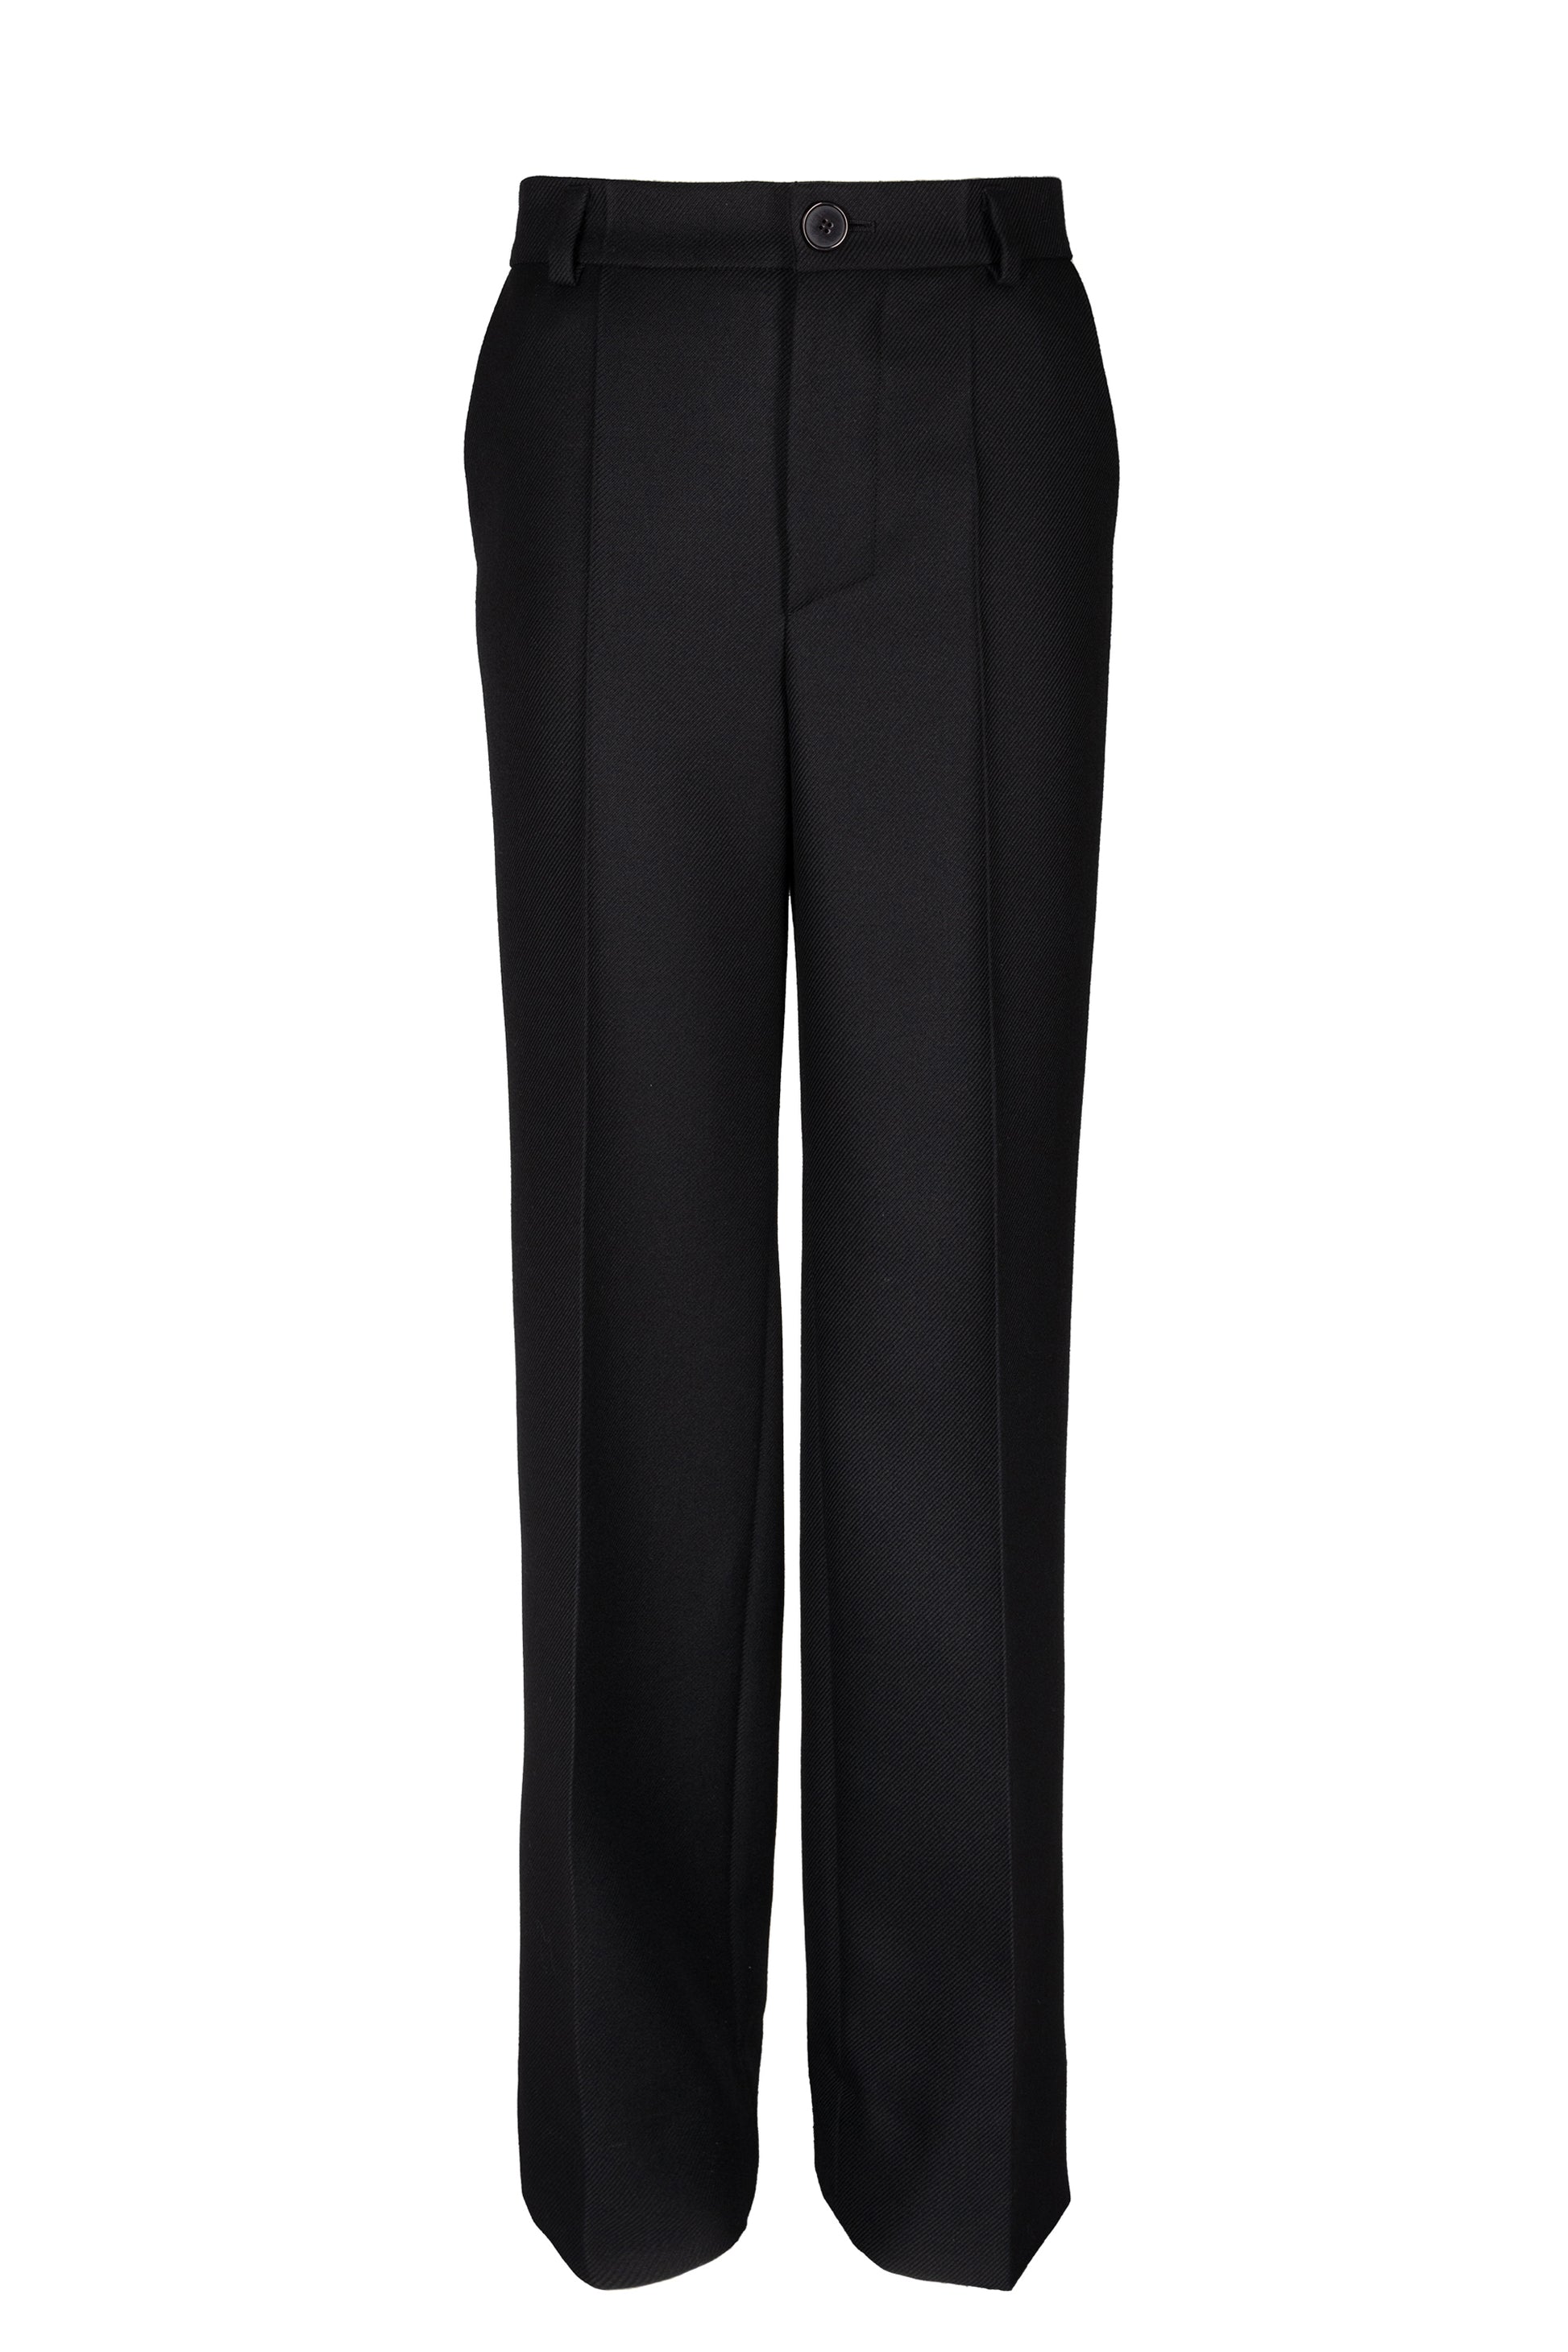 Black woolen pants with straight-leg cut and front pleats, made from premium Italian wool, offering a sleek and tailored appearance.